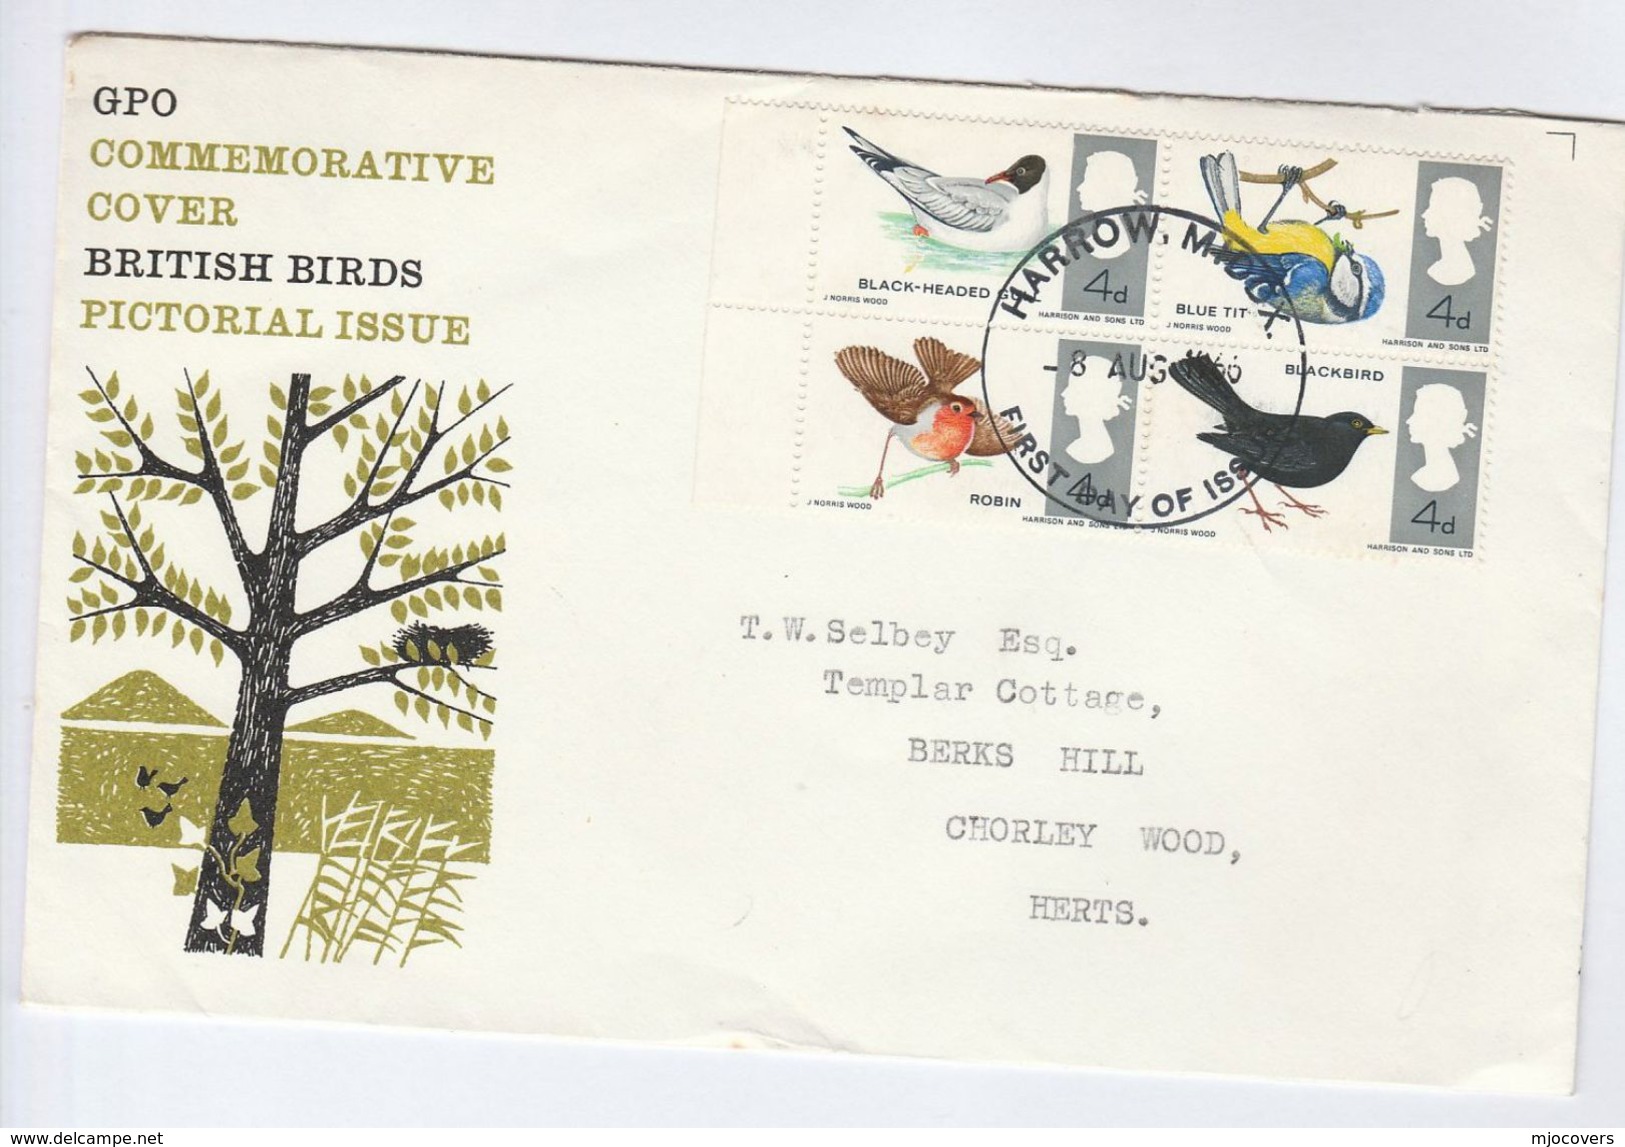 1966 Harrow GB FDC BIRDS Stamps Cover Bird - 1952-1971 Pre-Decimal Issues